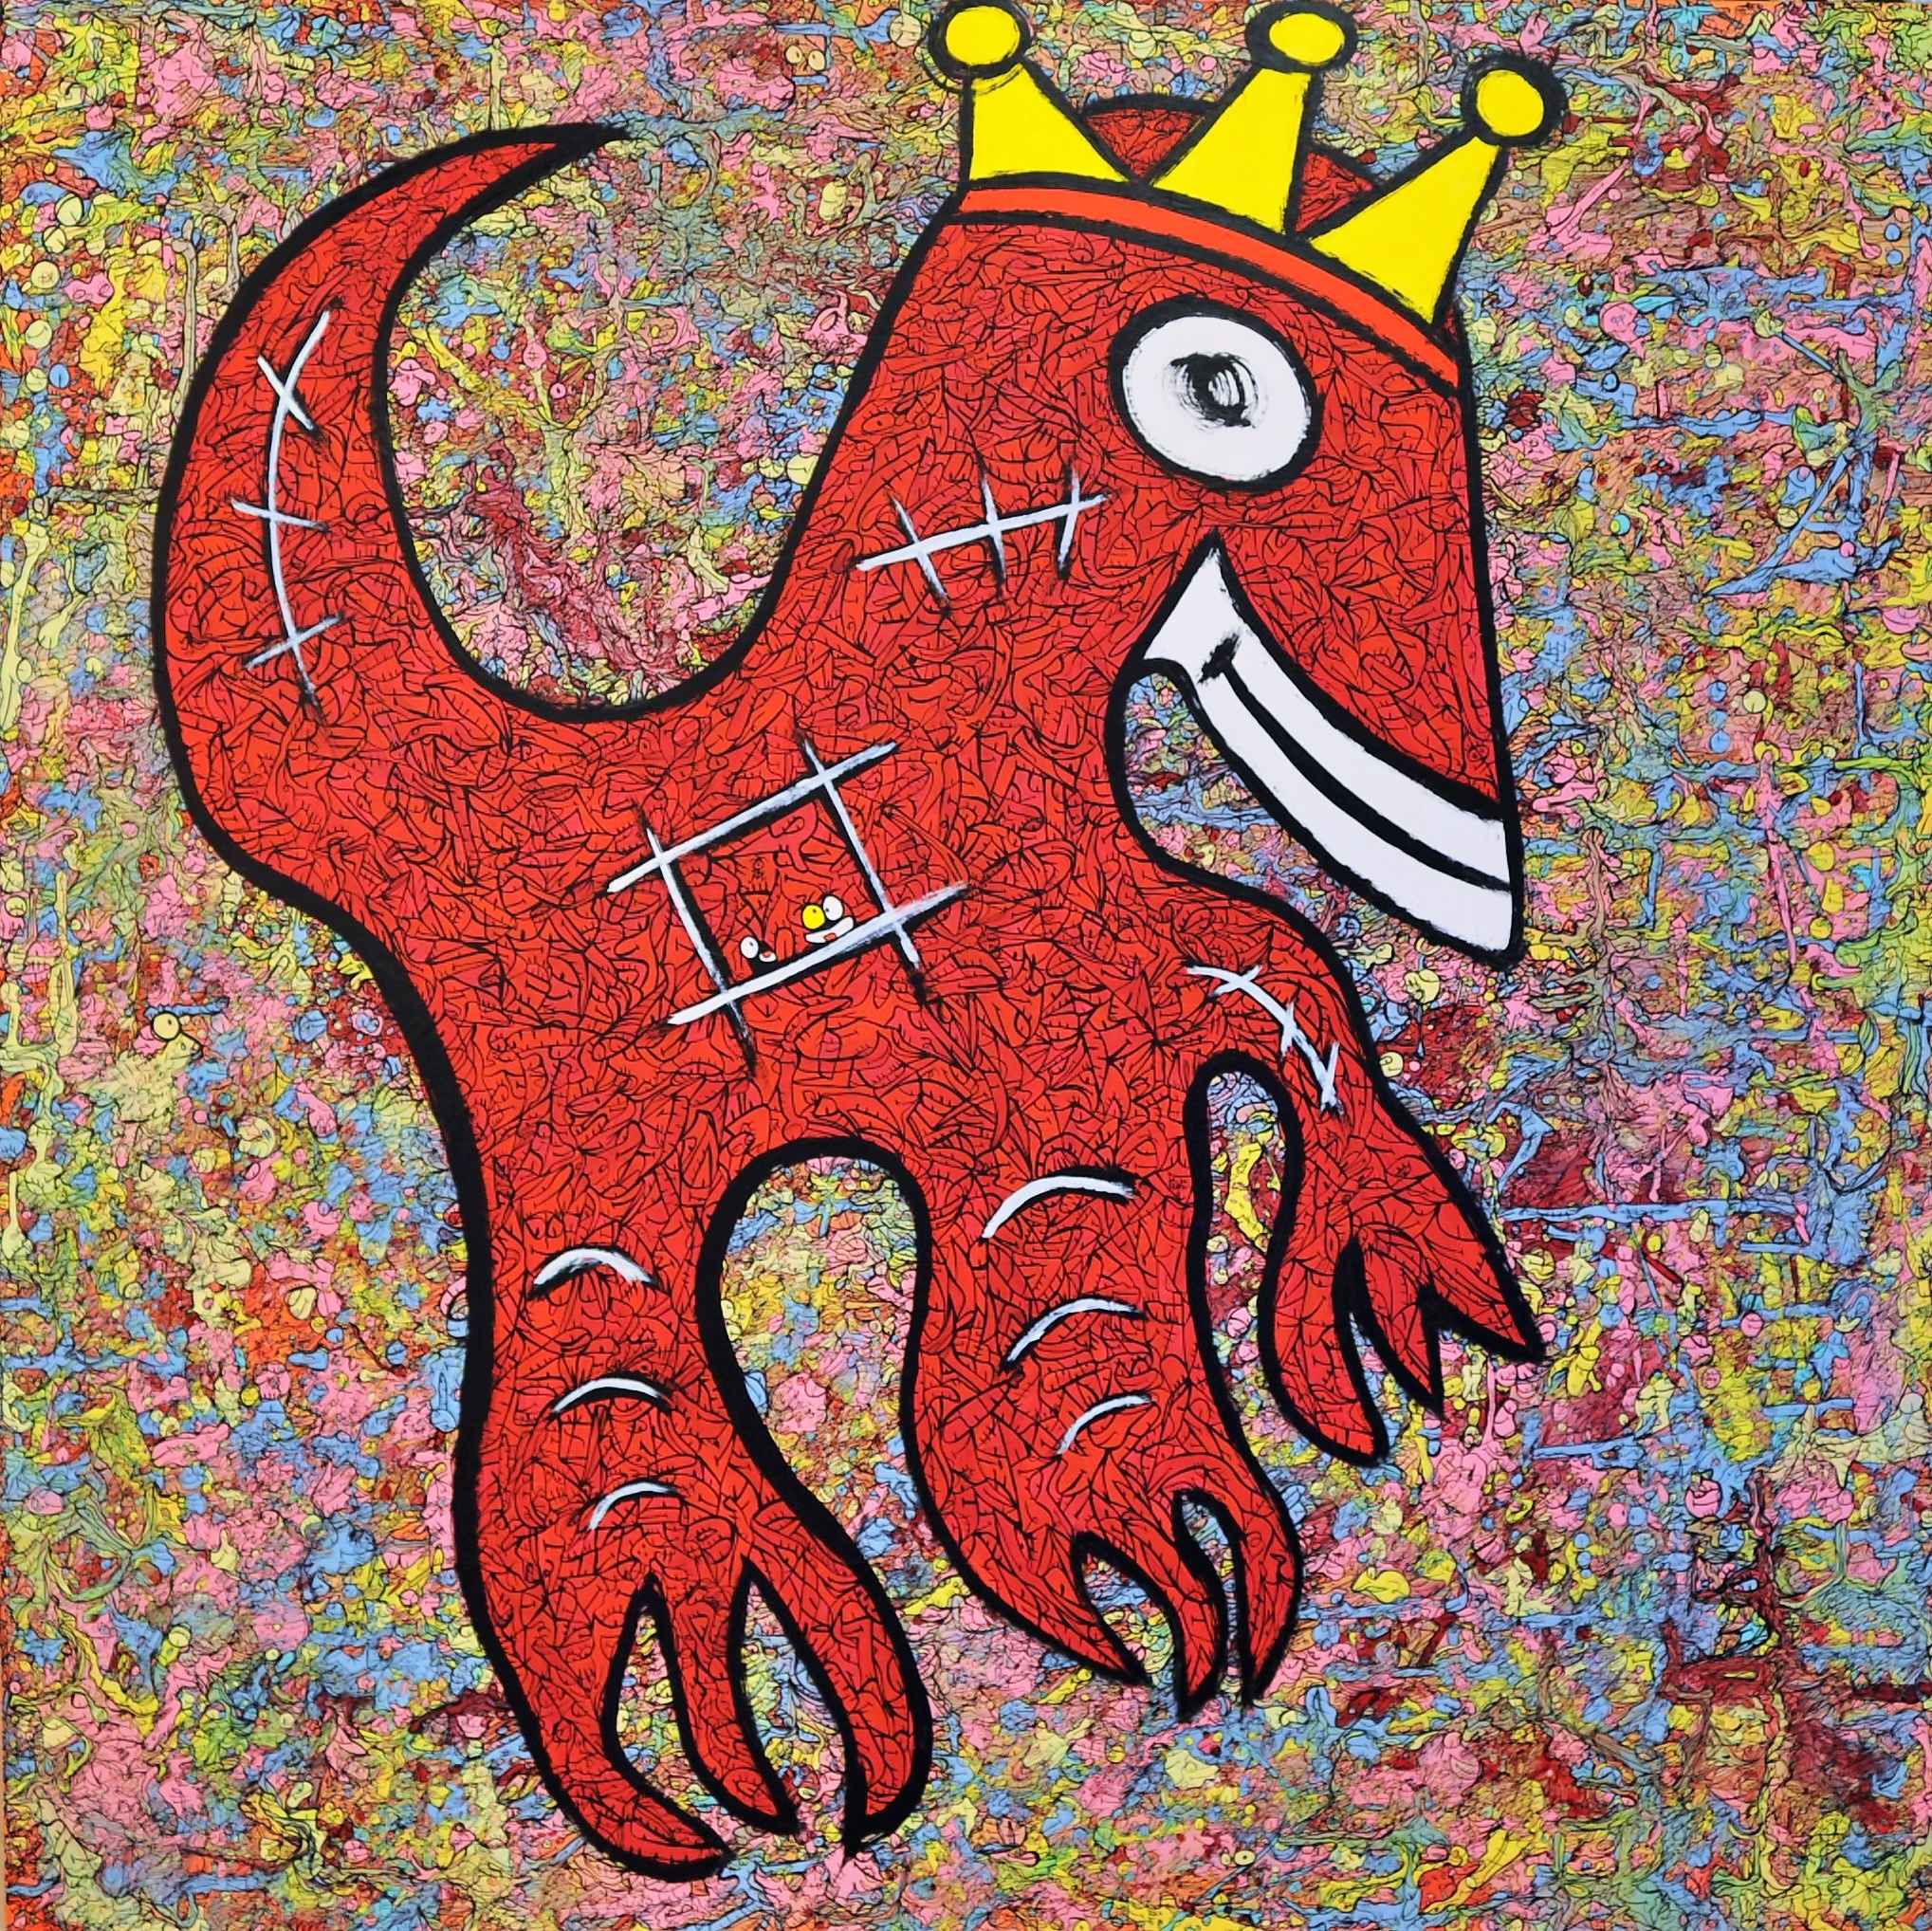 The King Is Dead Long Live The King Acrylic 2016-2017 Size 100x100 cm